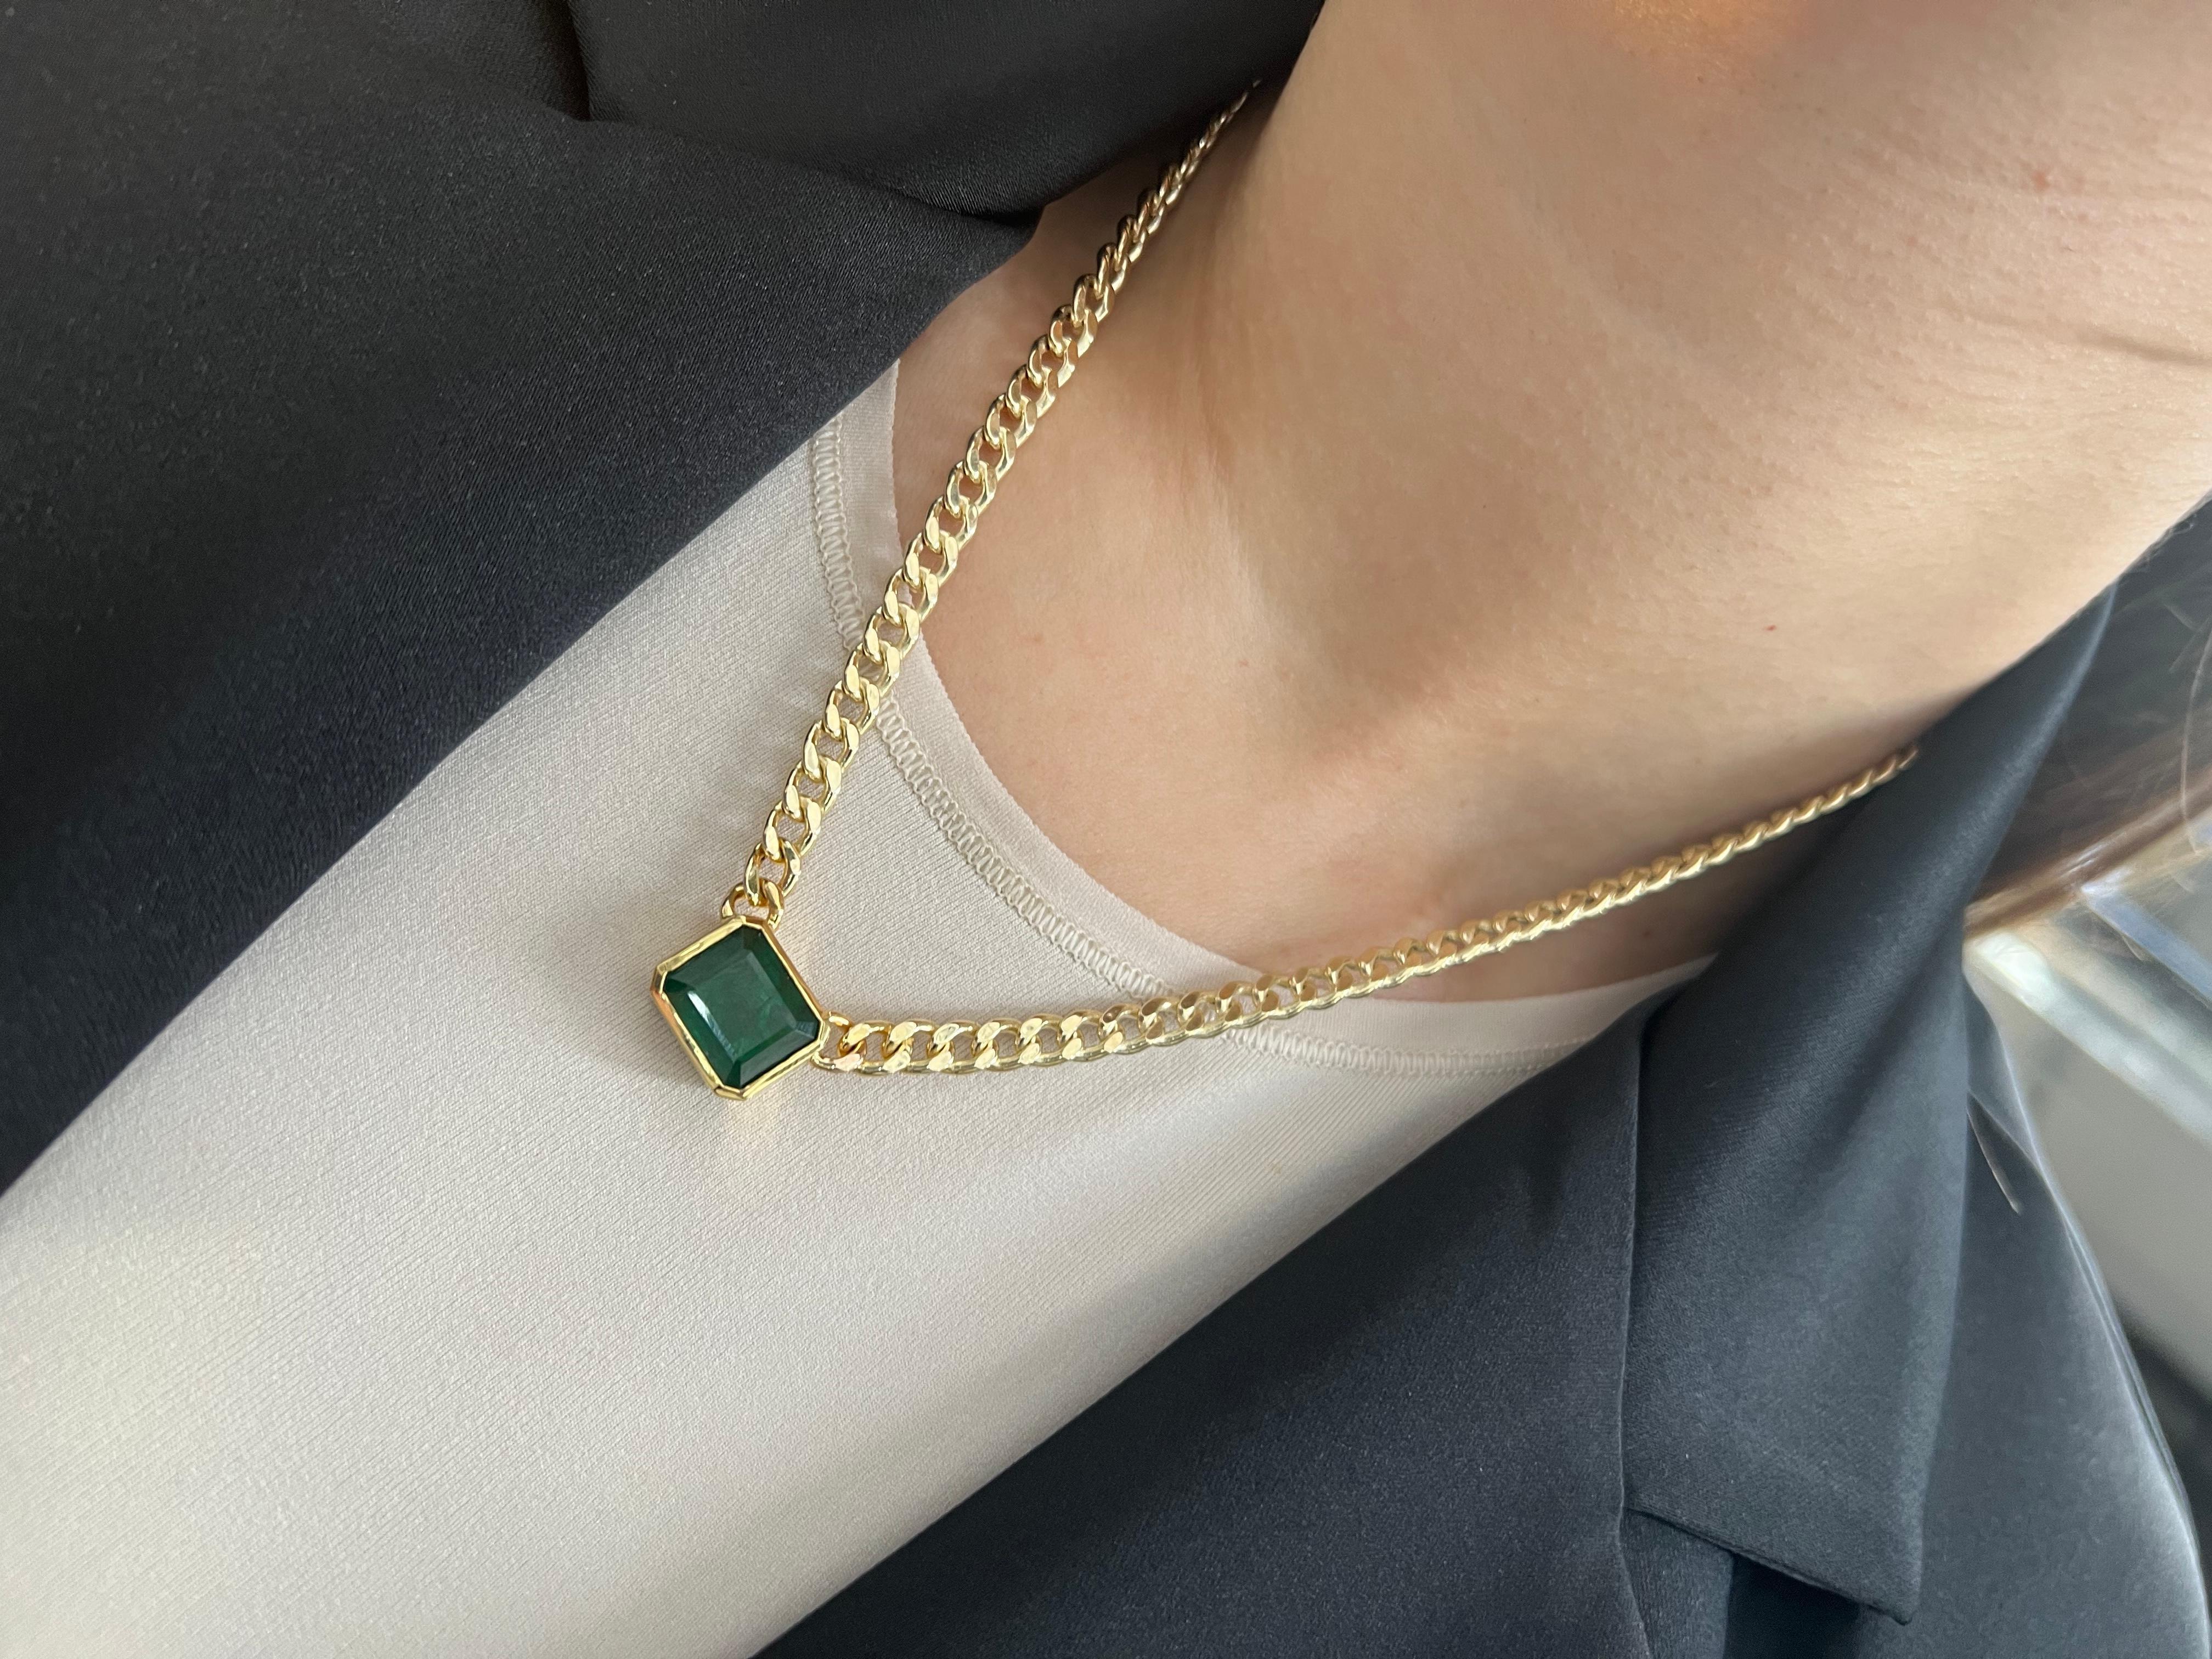 5.5ct Emerald Necklace, 14k Yellow Gold 8